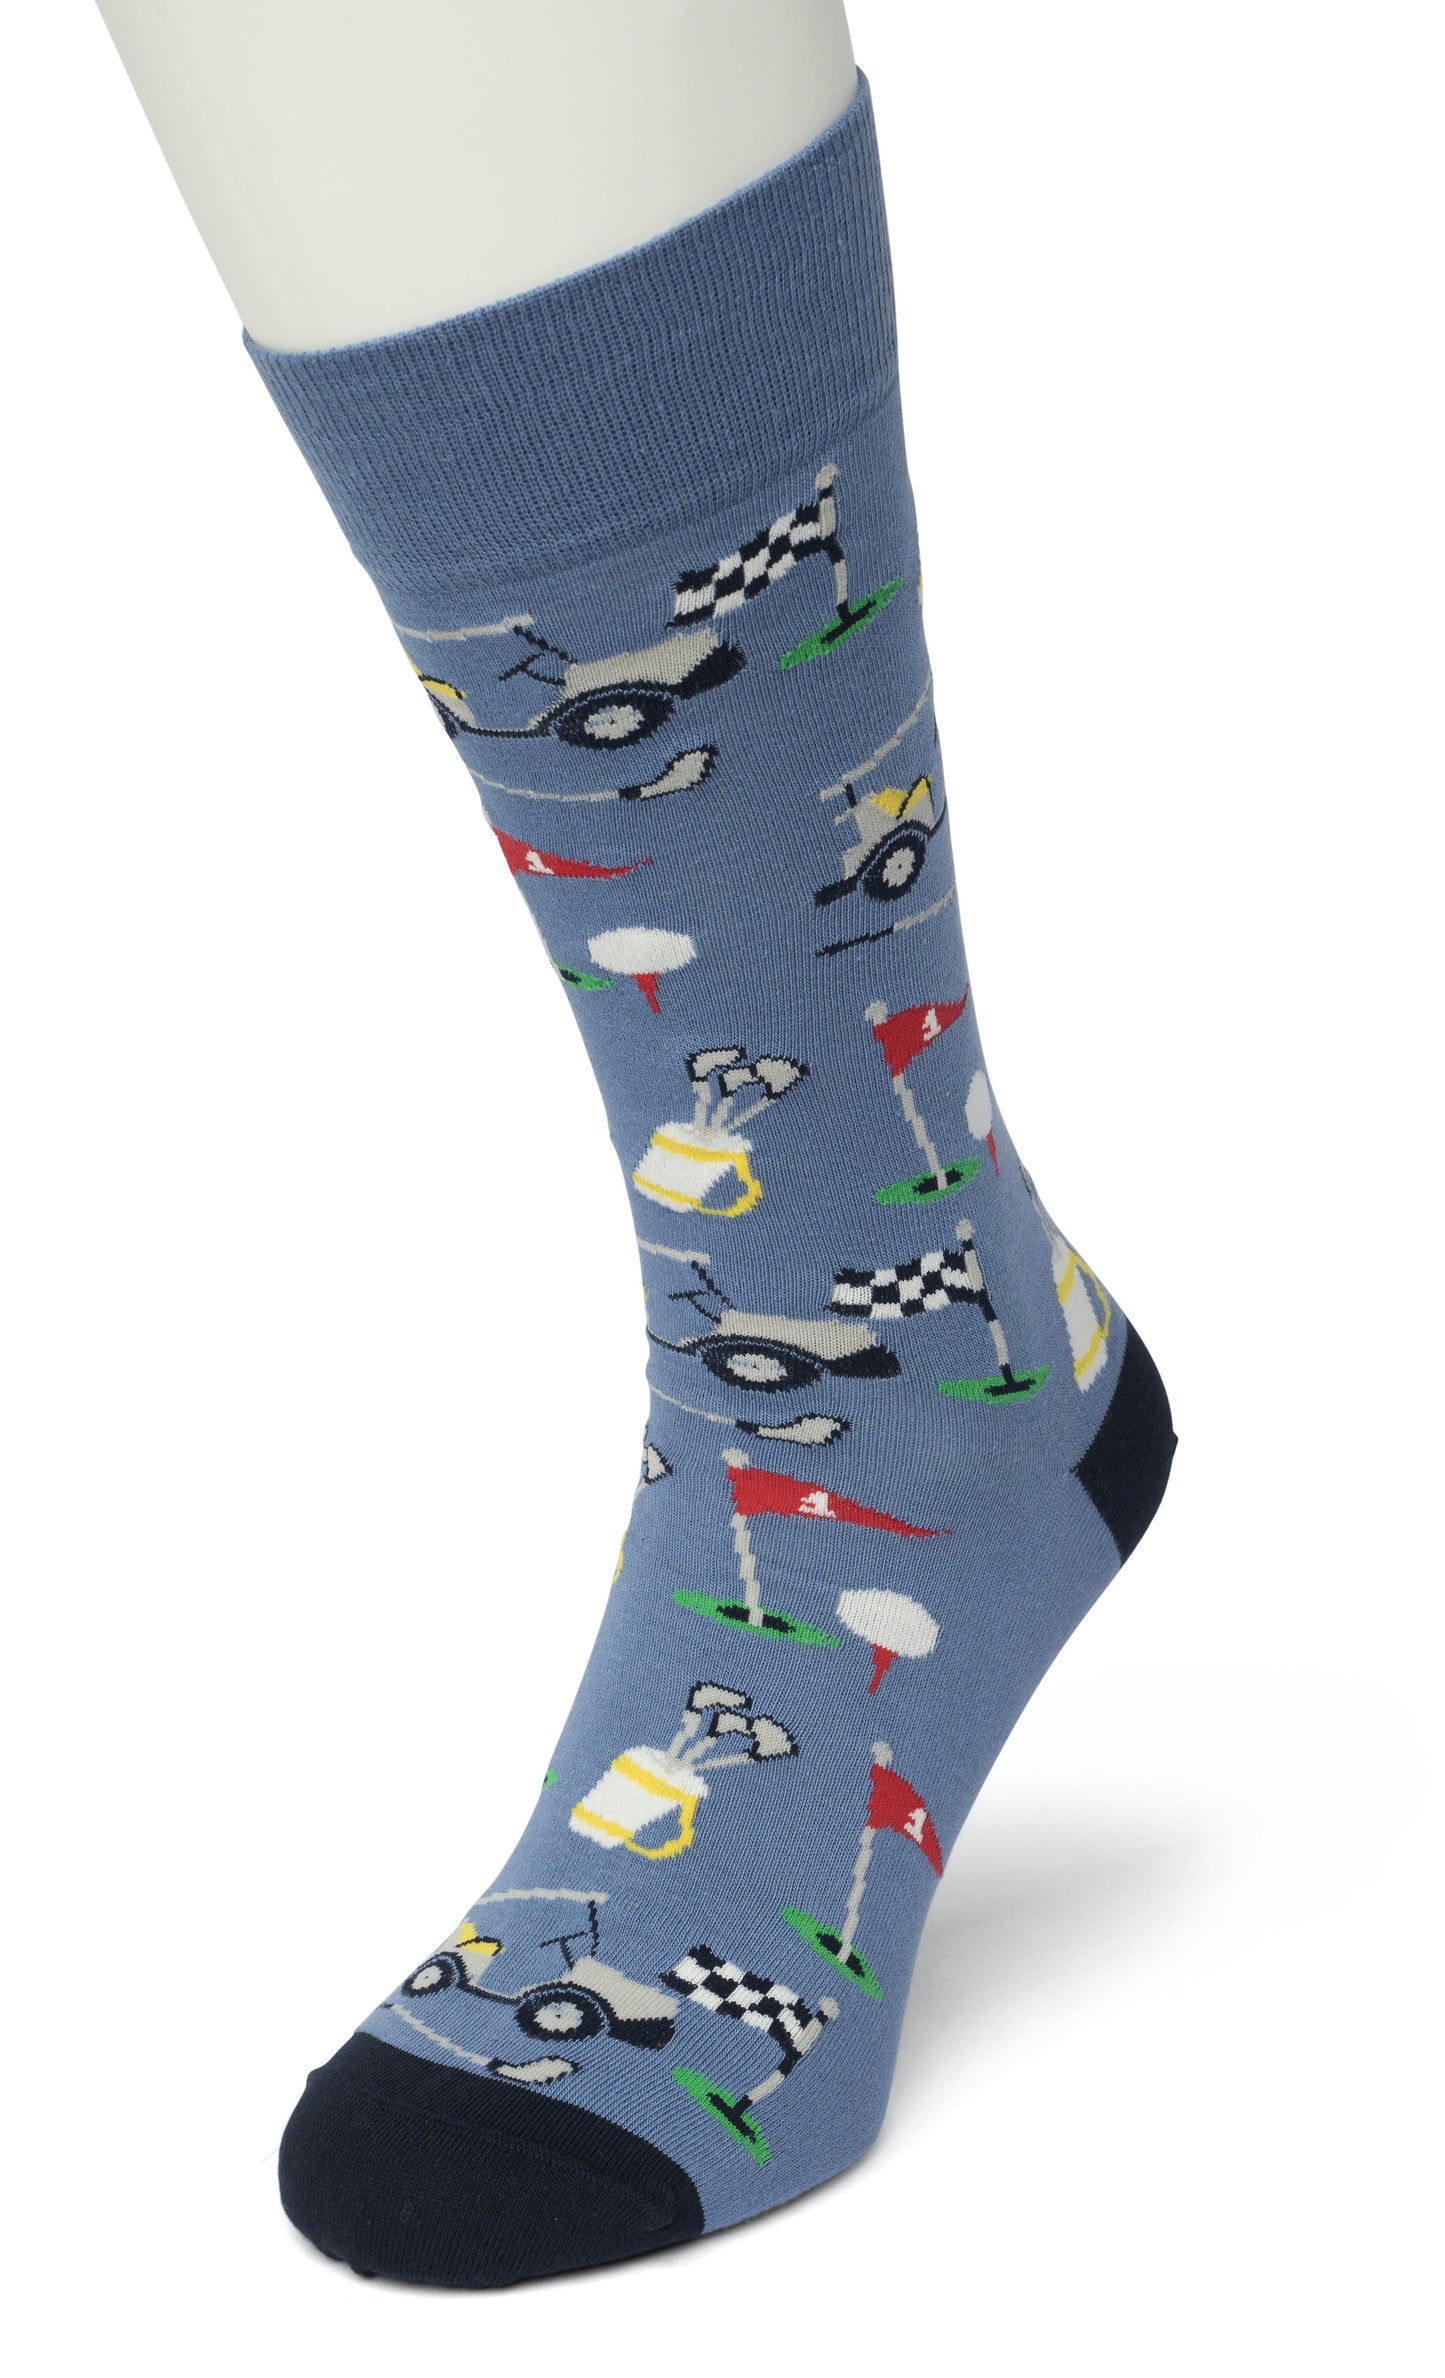 Bonnie Doon Golf Sock - Men's blue cotton ankle socks with a golf themed pattern of clubs, flags, buggies and balls.